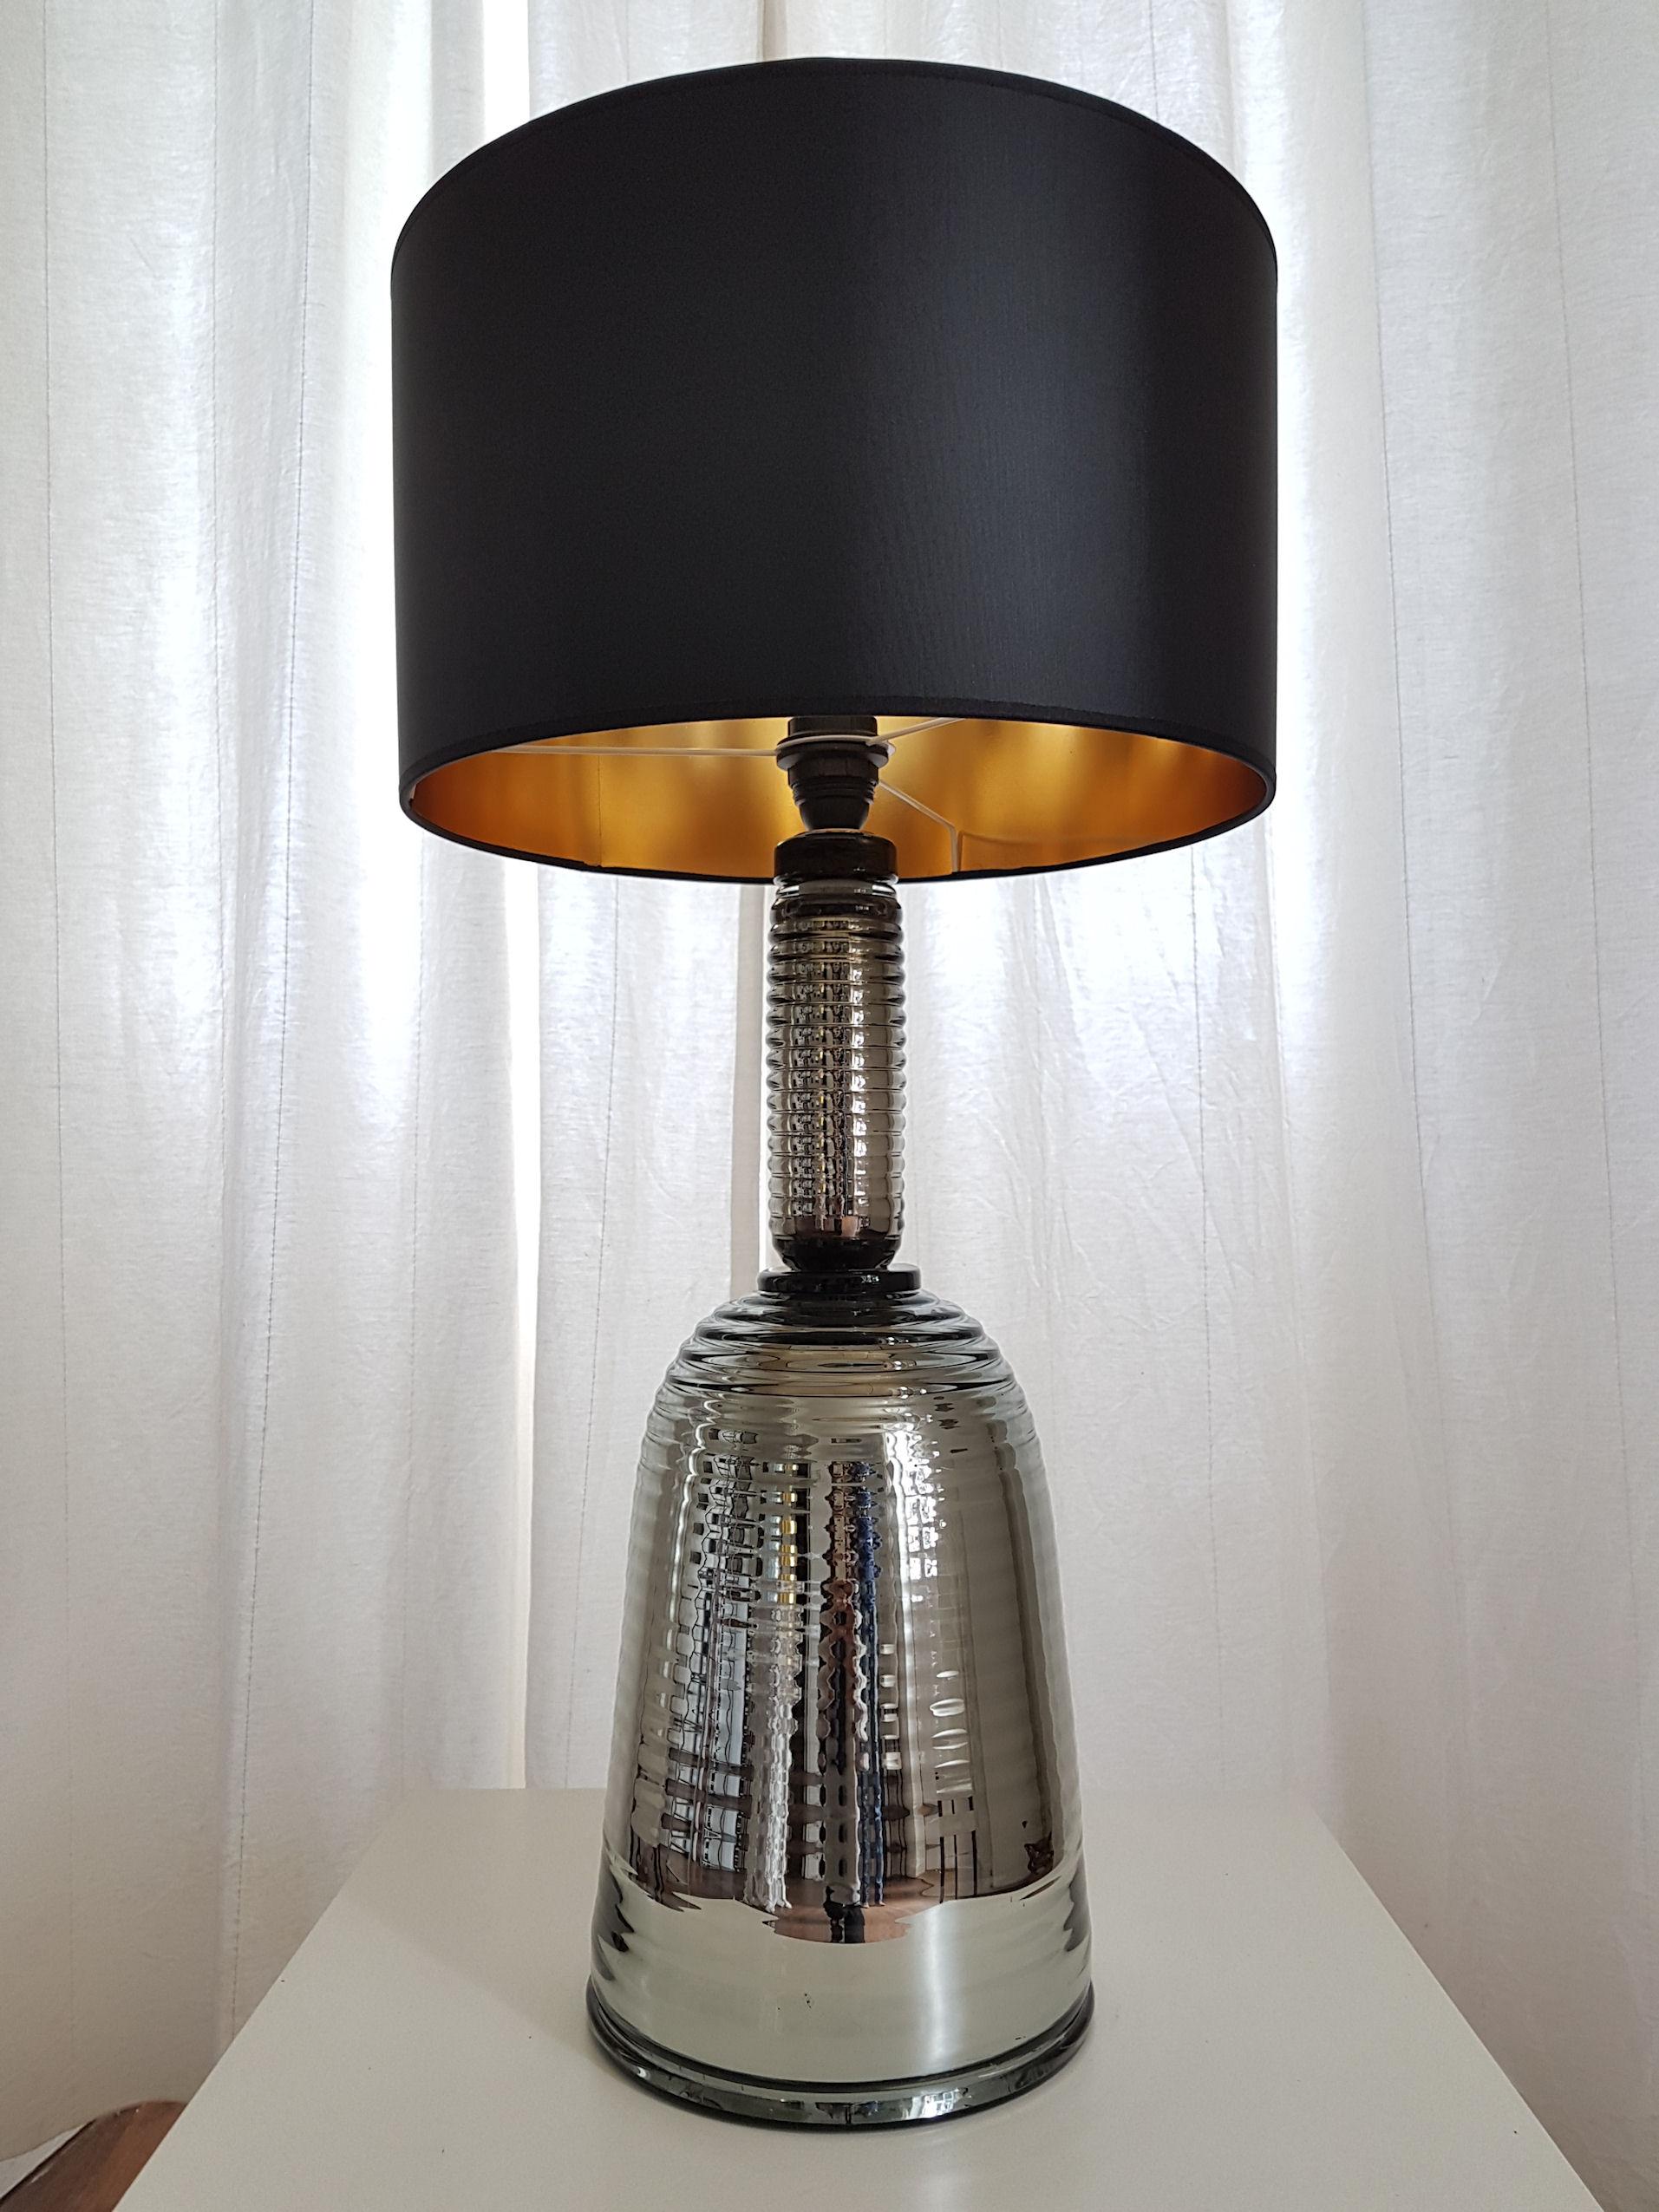 Pair of large silver mirrored Murano glass lamps, early 1980s.
Italy, Mid-Century Modern style lamps.
1 light each, medium base, rewired for the US.
In excellent condition.
New black and gold fabric shades, sold separately.